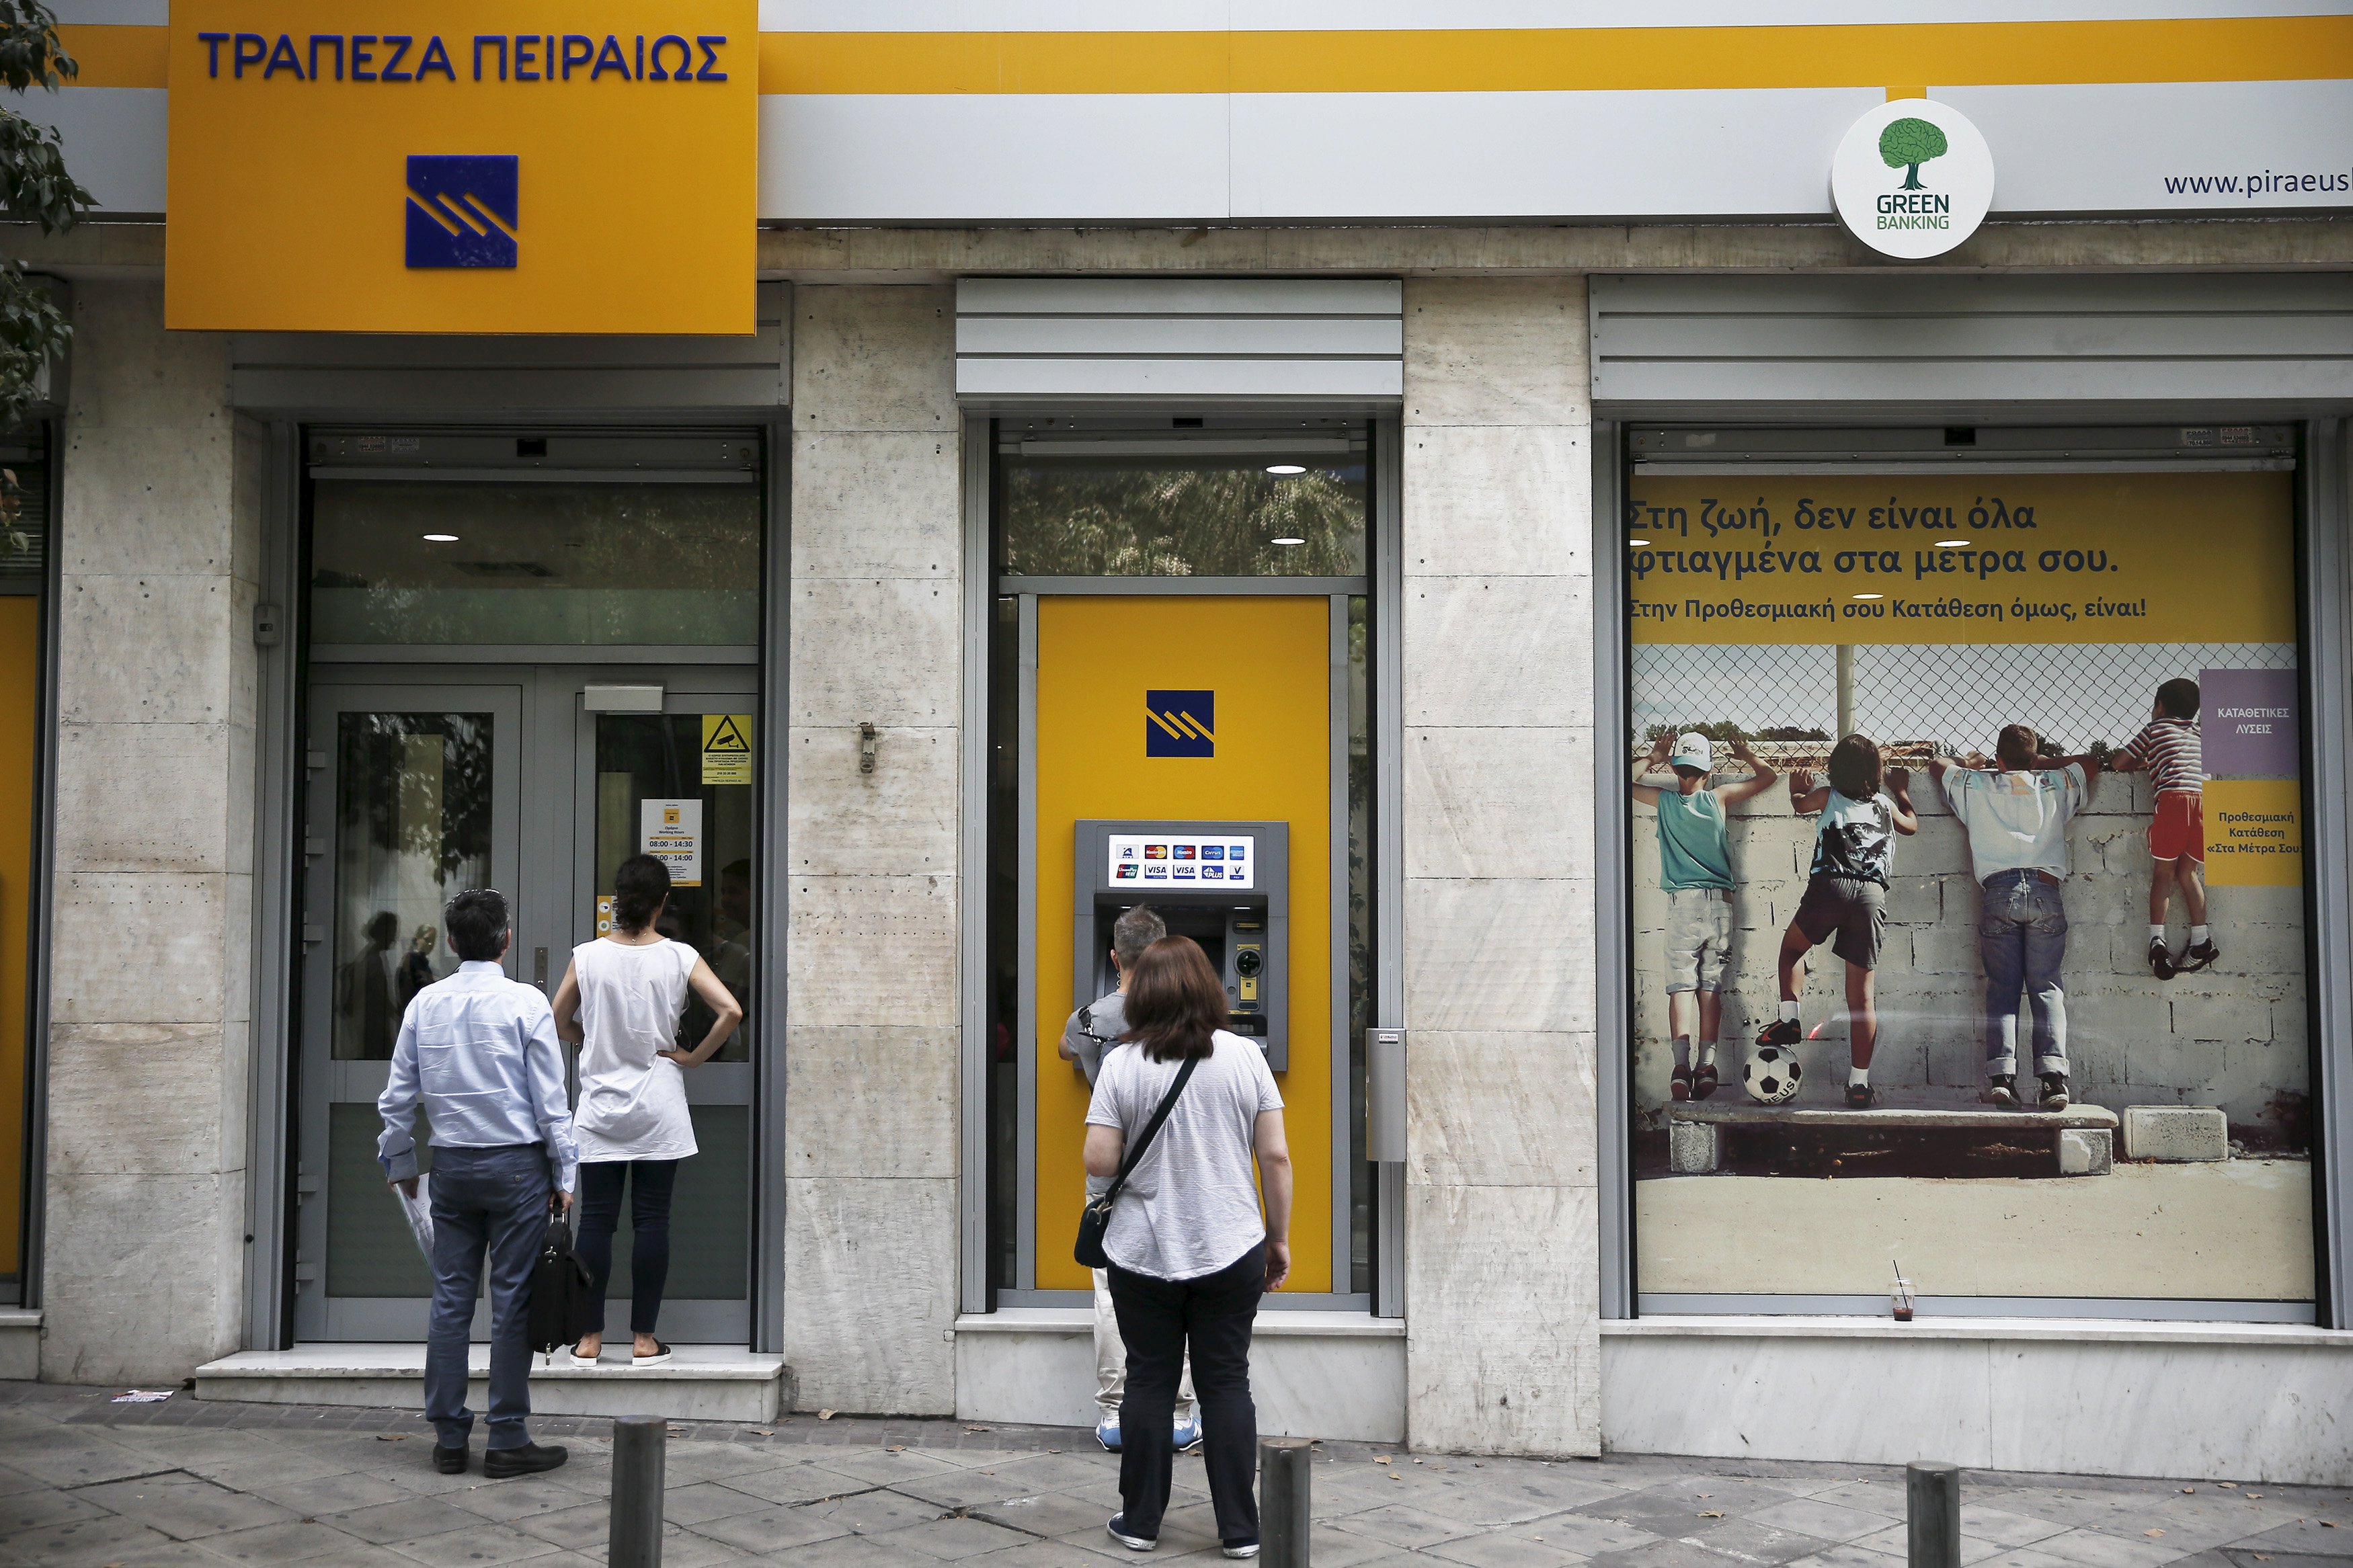 No rush: people make calm transactions with no sign of panic withdrawals in Athens